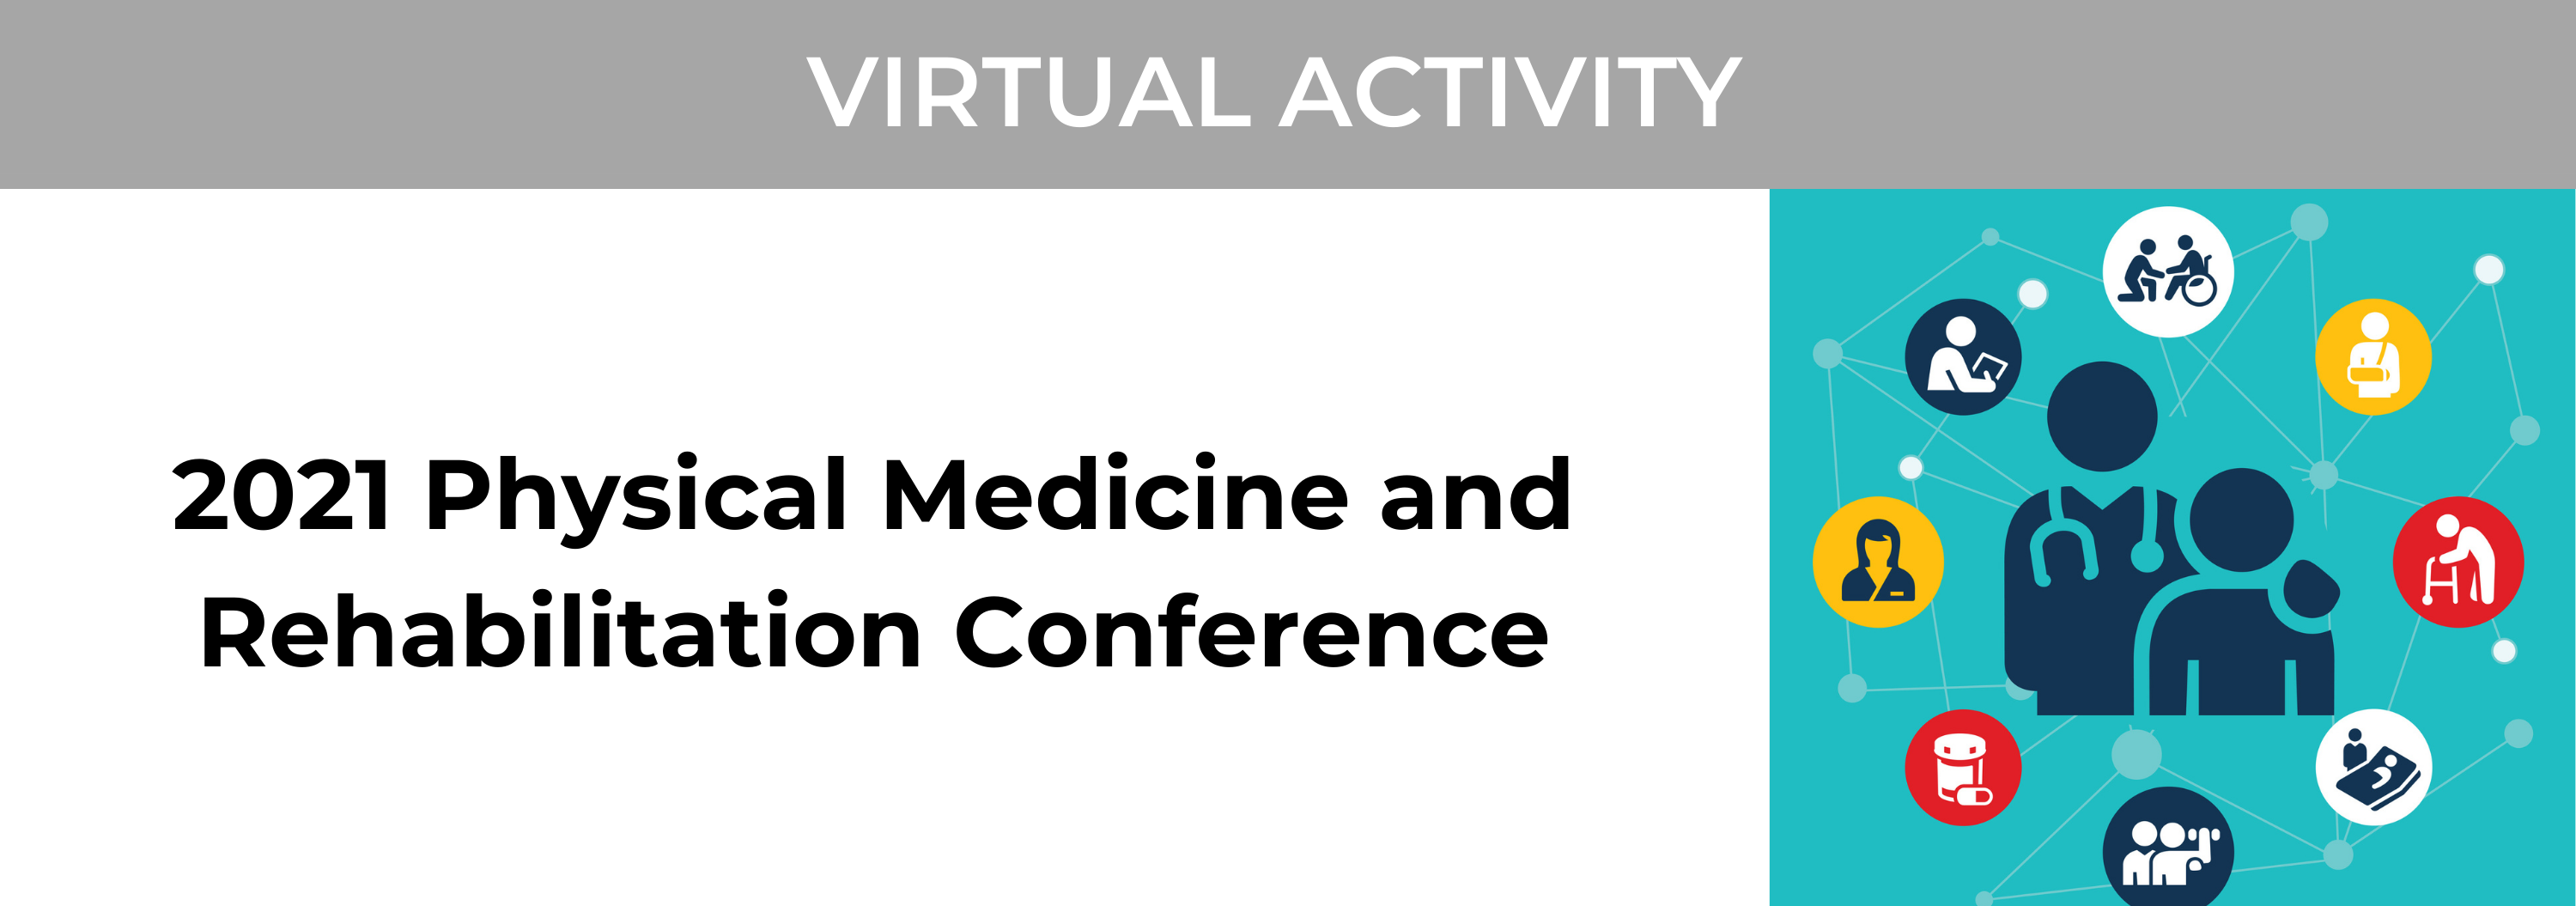 2021 Physical Medicine and Rehabilitation Conference: Creativity and Collaboration in Changing Times Banner